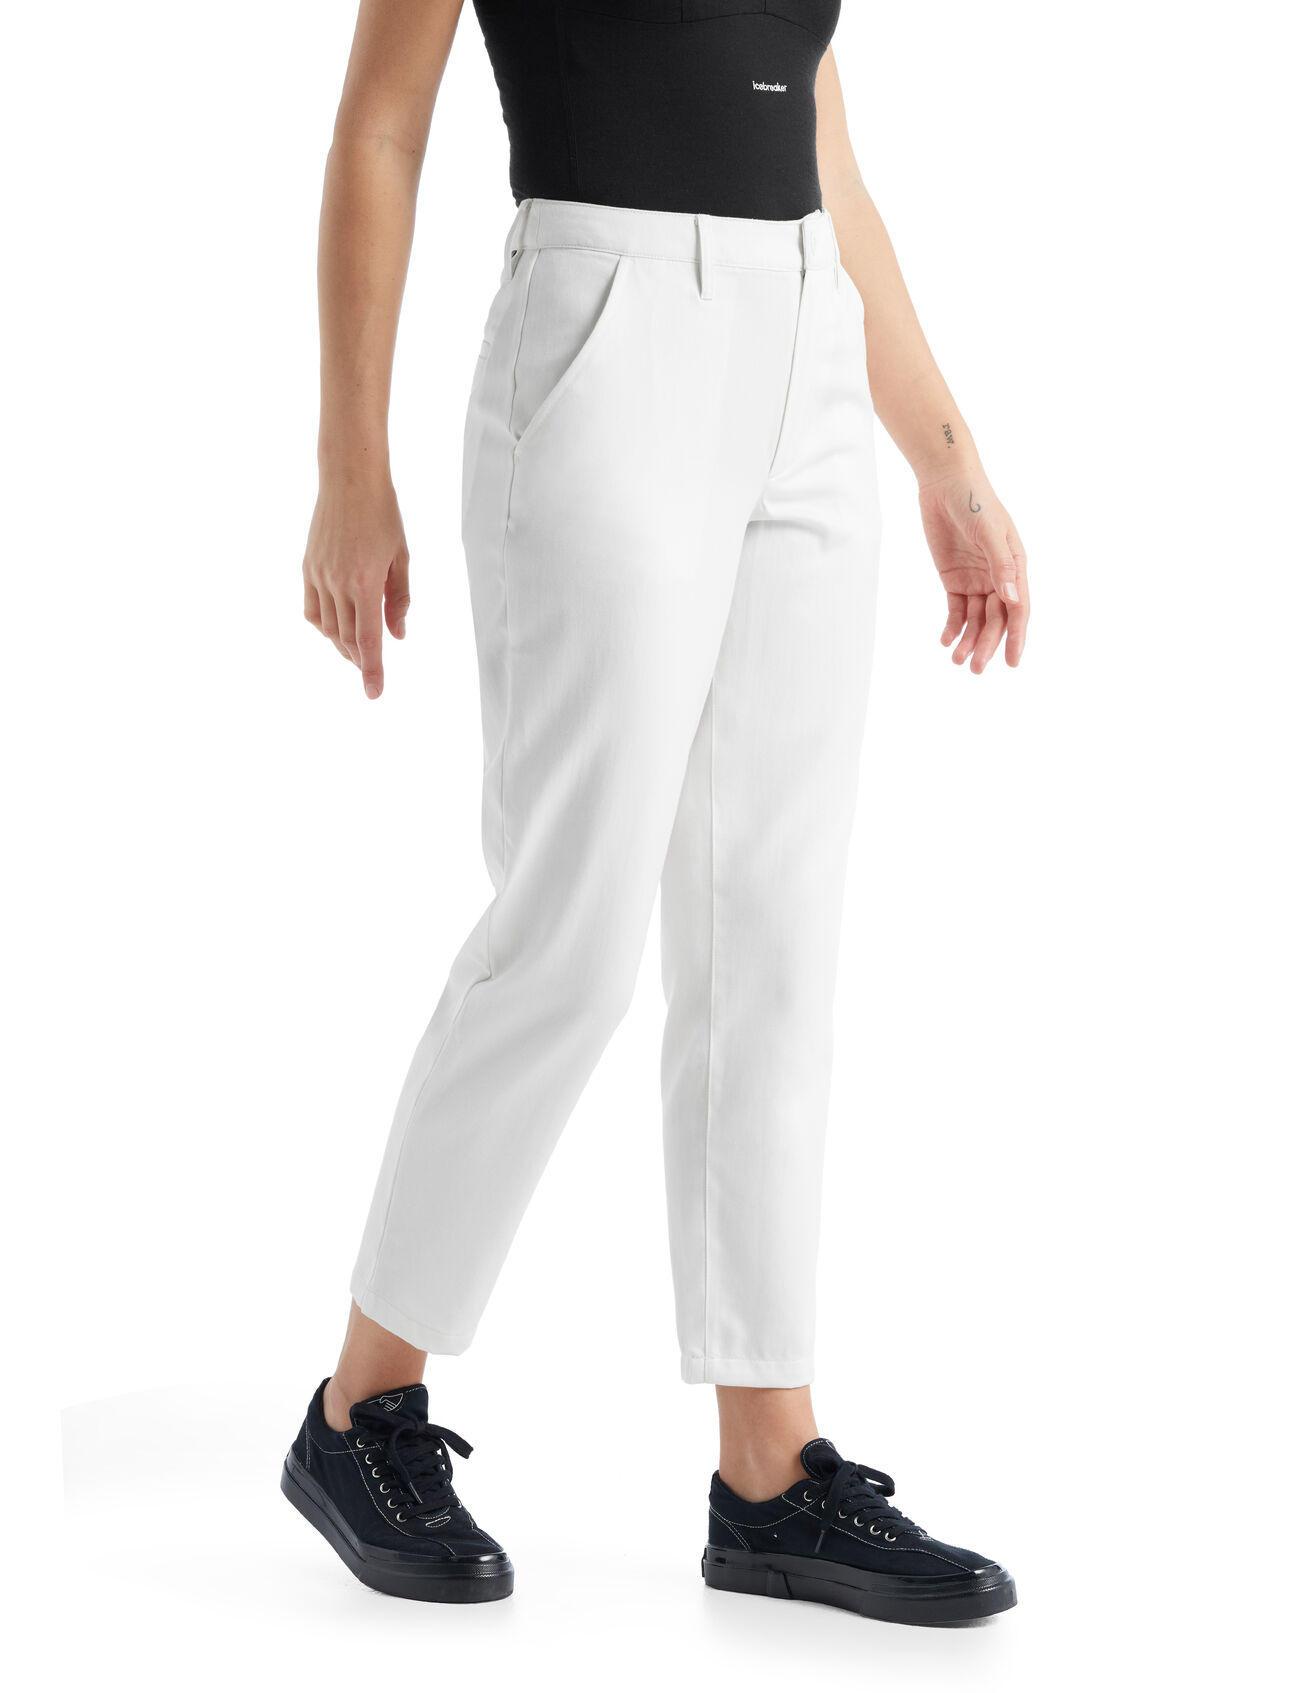 Womens Merino Berlin Pants A classic, versatile chino pant, the Berlin Pants feature a unique  blend of all natural merino wool and organically grown cotton.